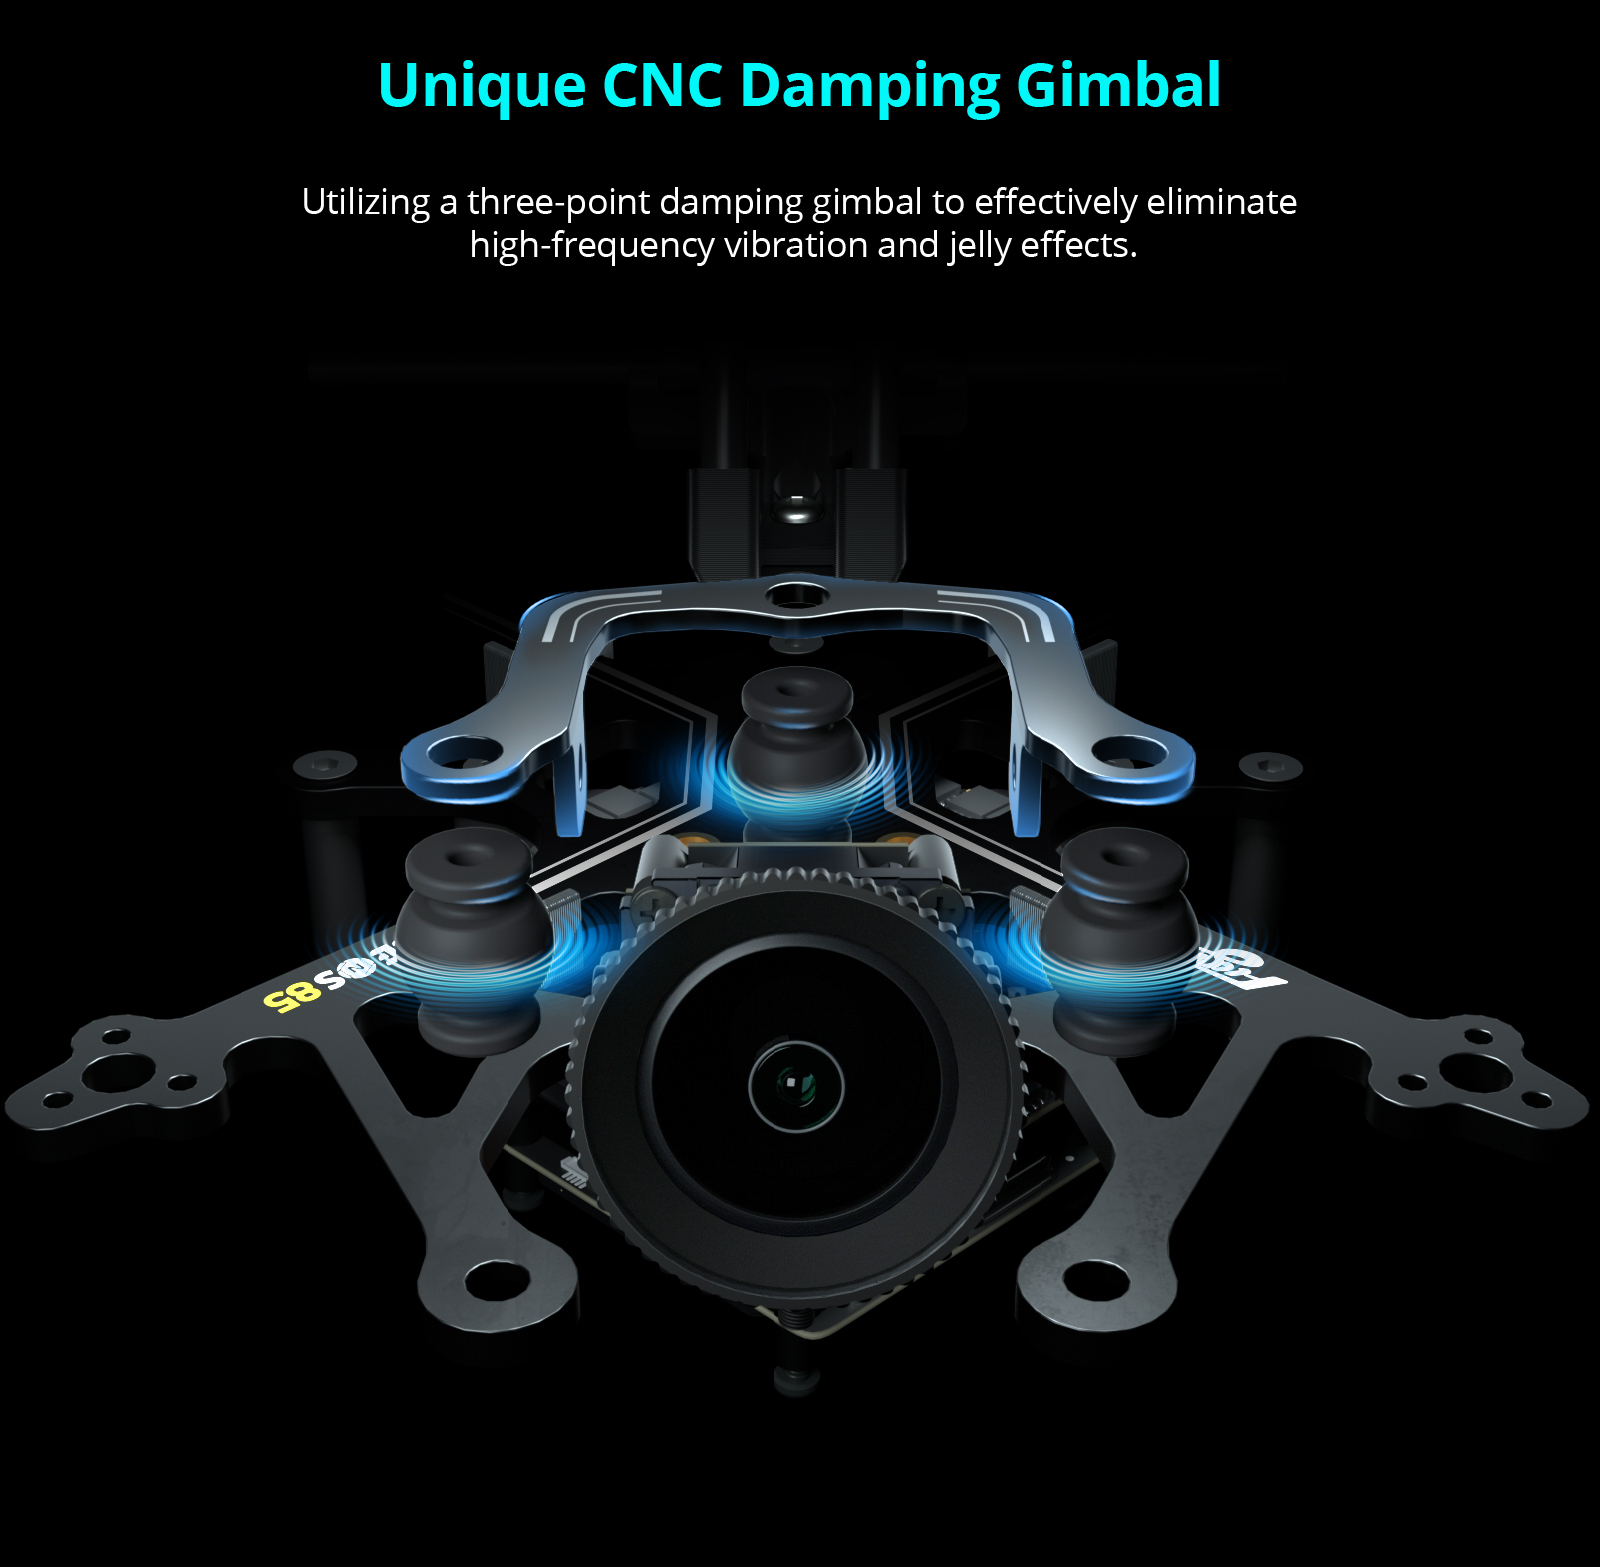 Unique CNC Damping Gimbal Utilizing a three-point damping to effectively eliminate